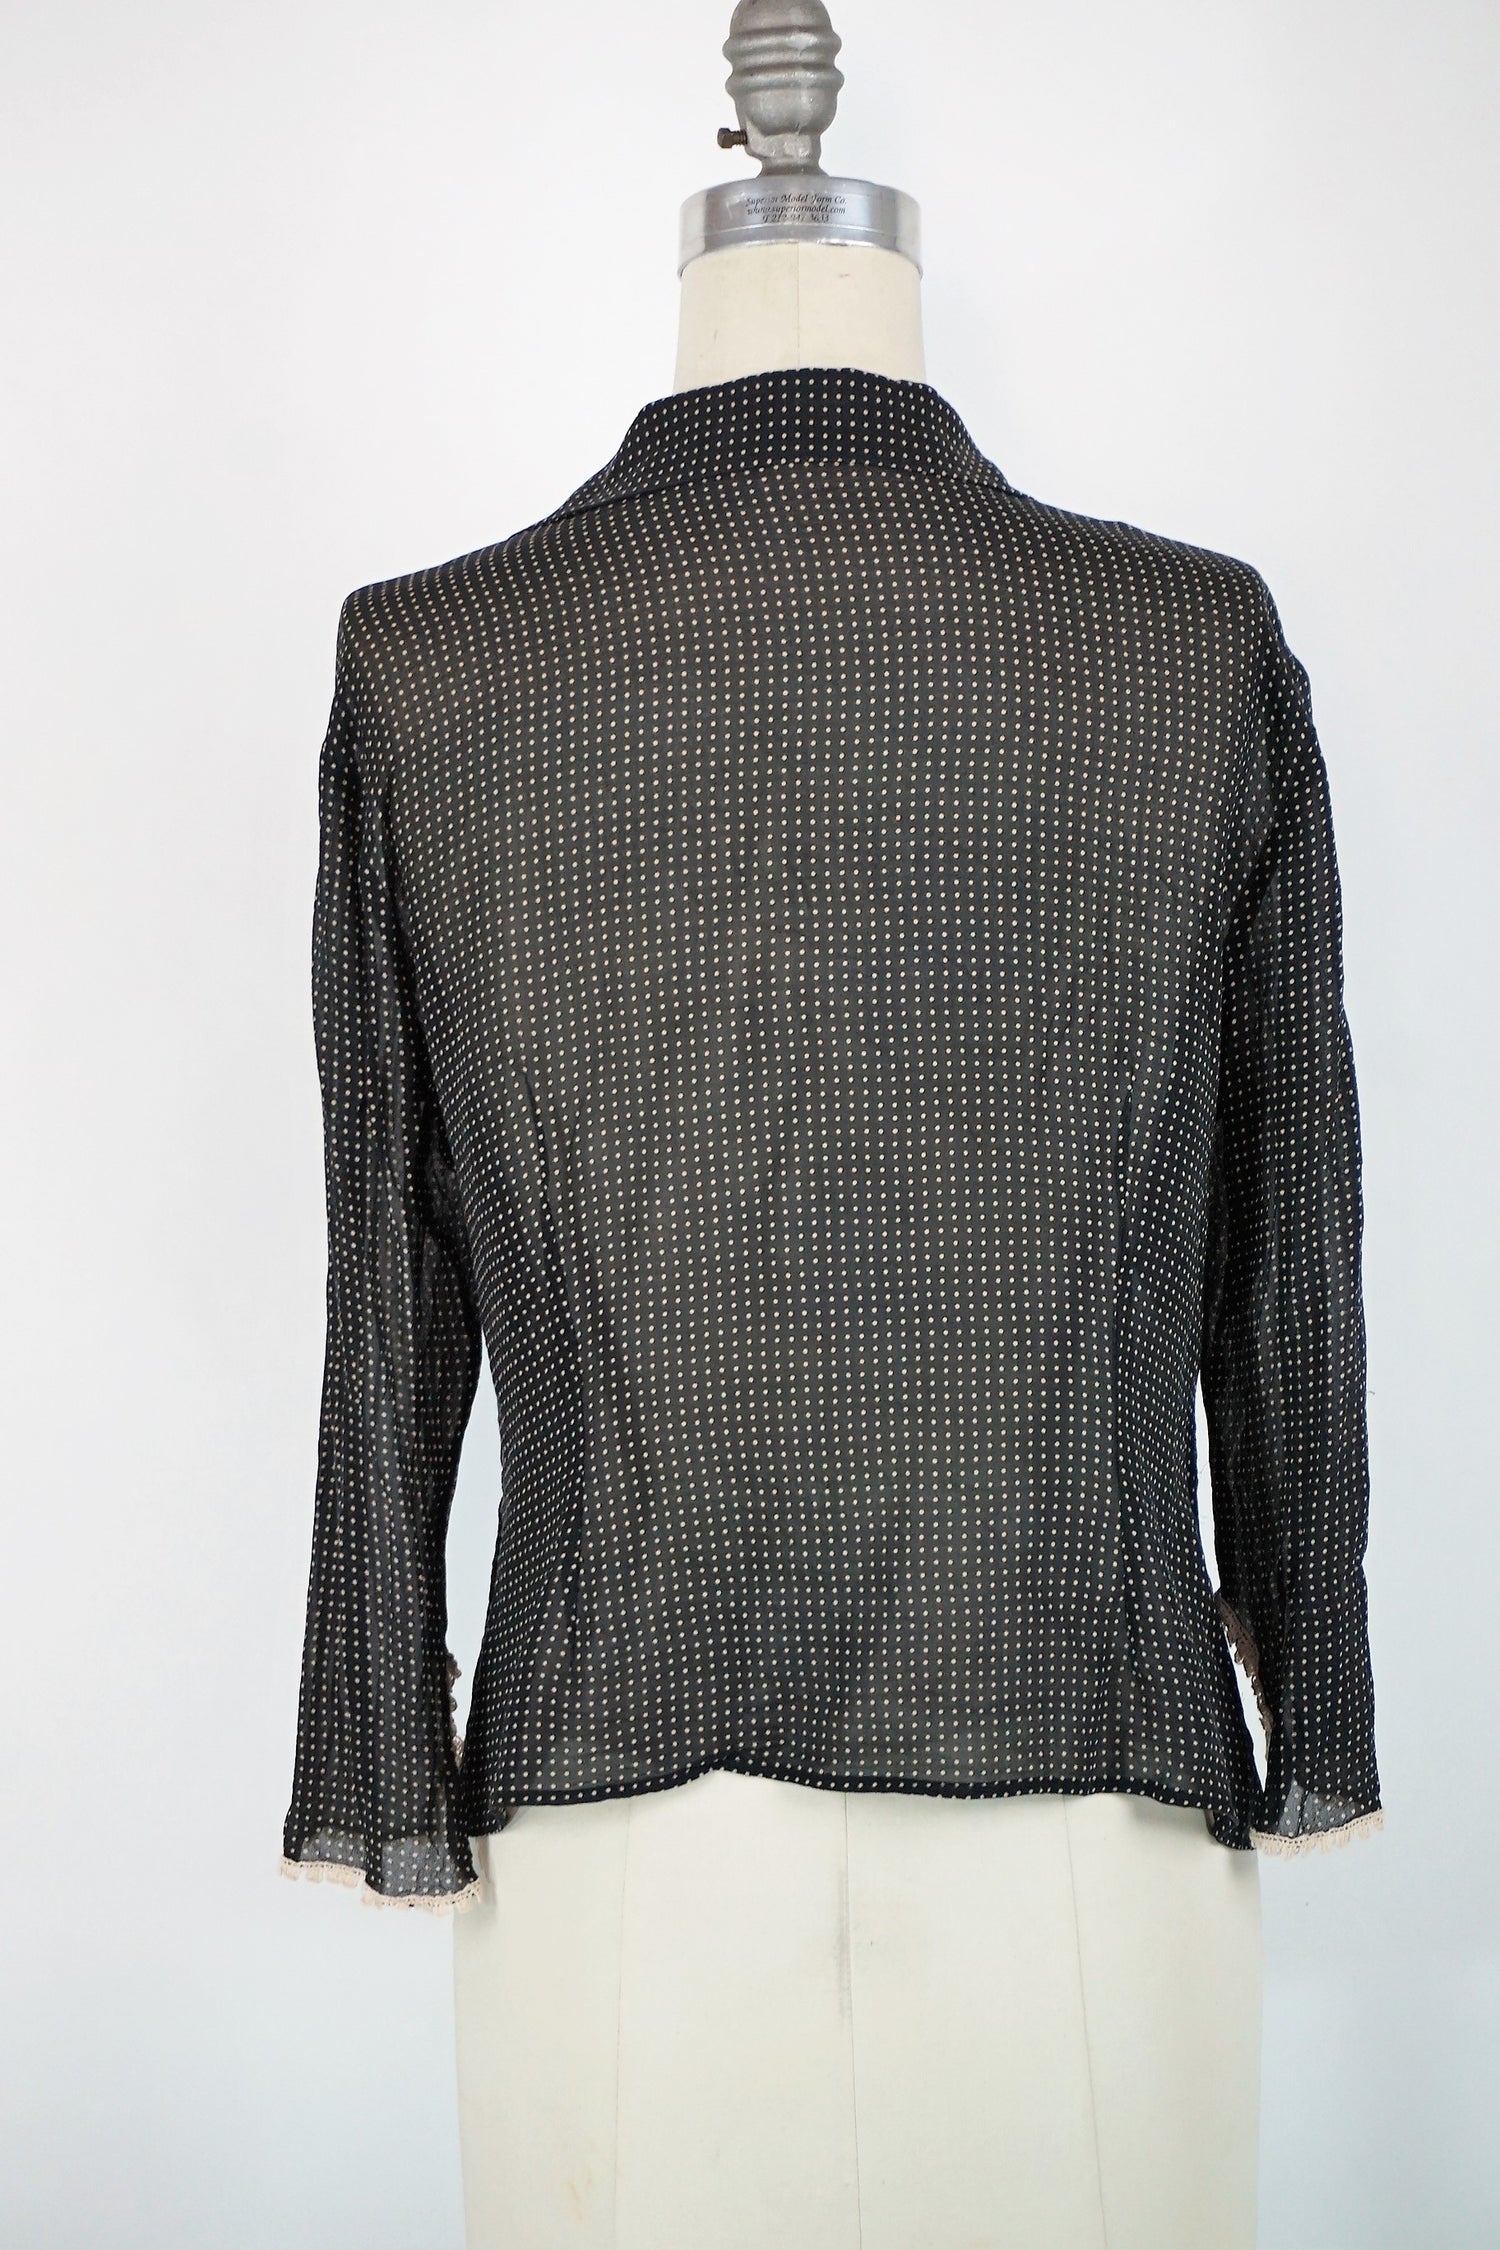 Black and ivory polkadot top, 40s style